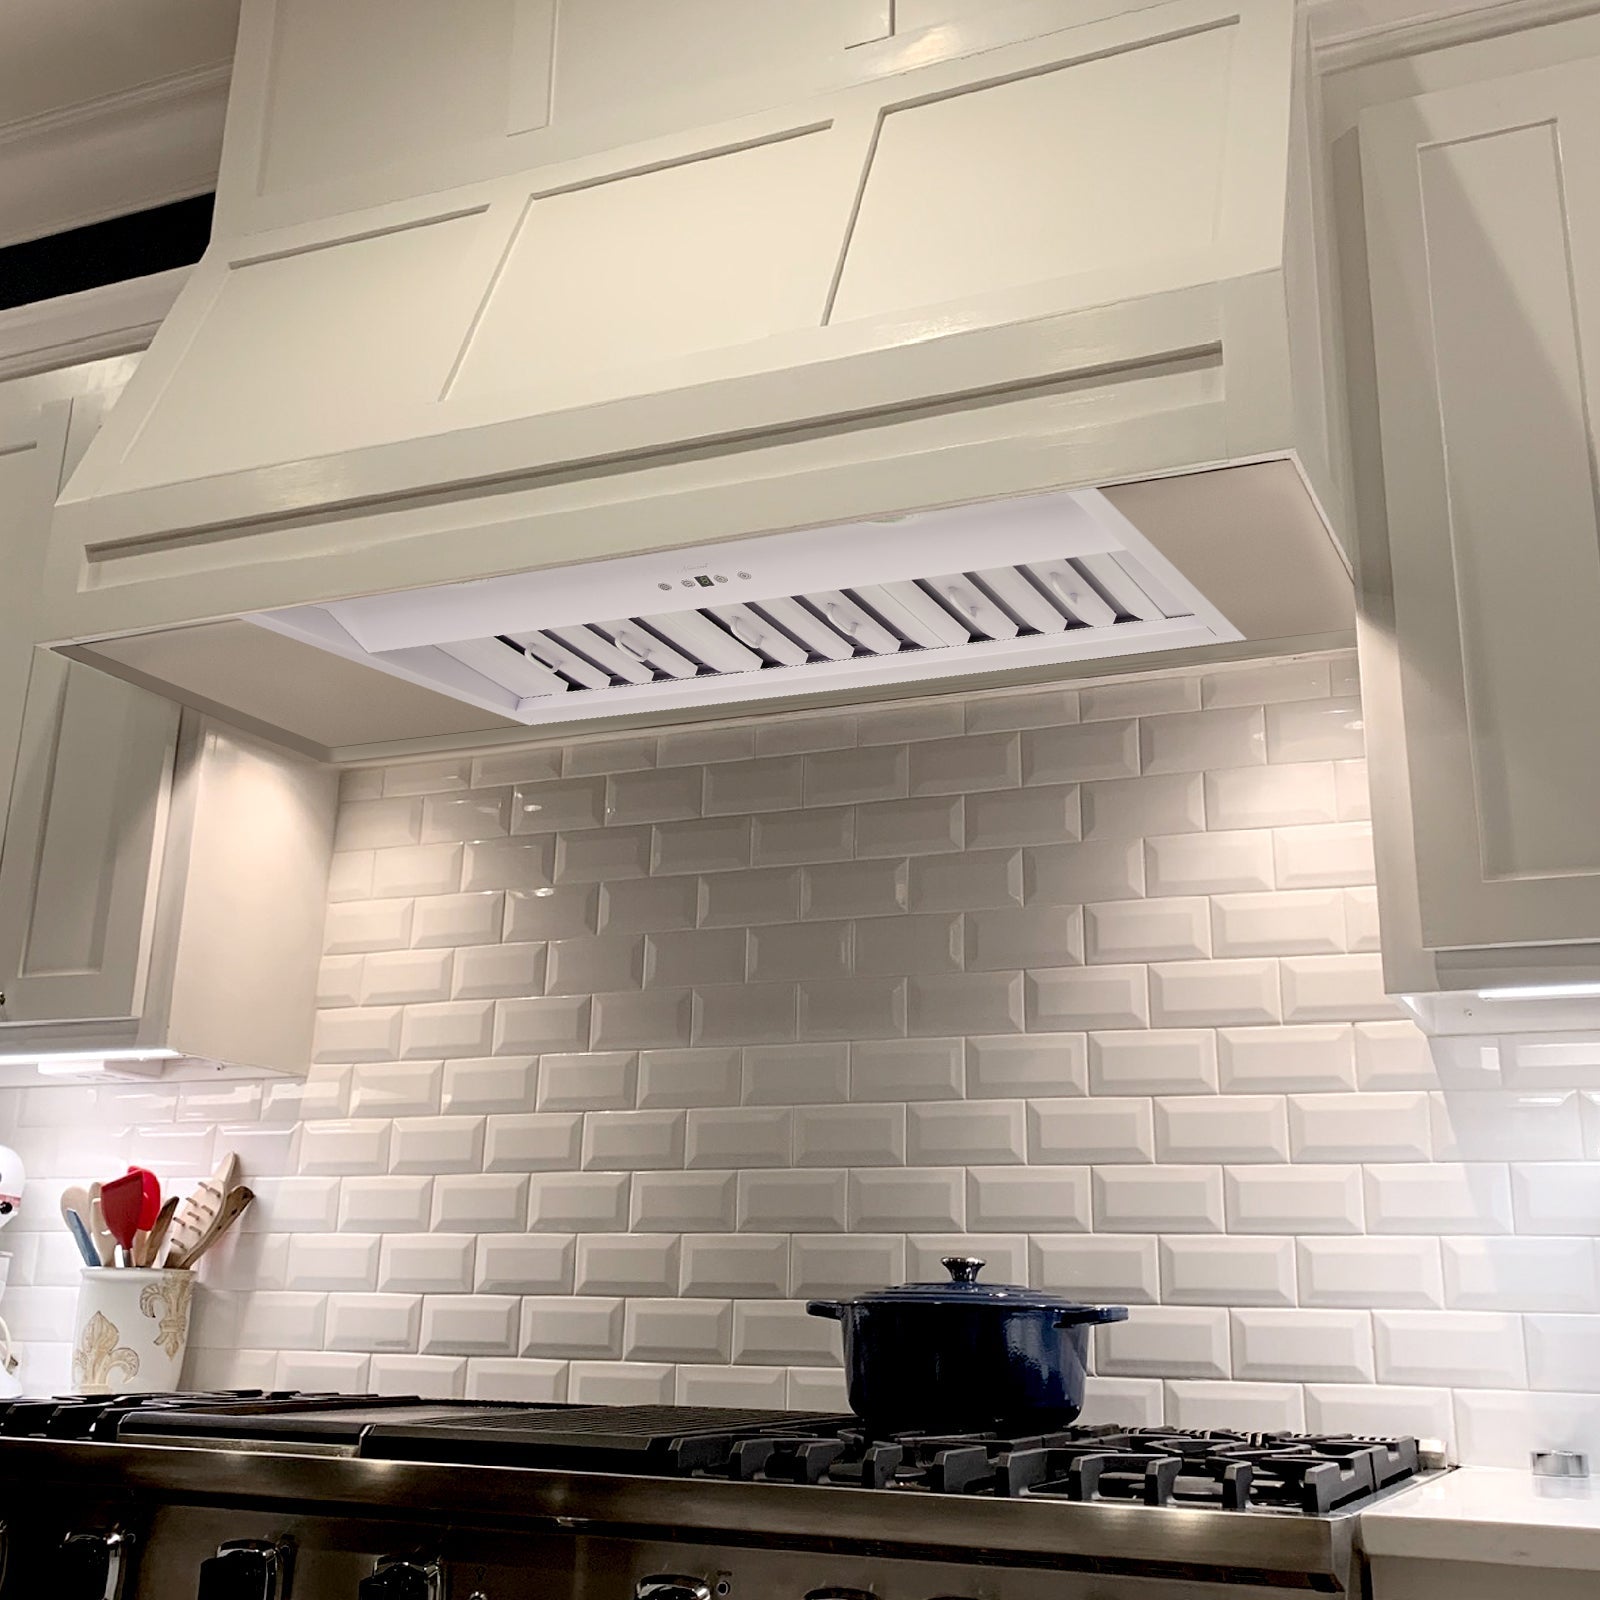 36 Inch Range Hood Insert, Ultra Quiet Stainless Steel Ducted Insert/Built-in Kitchen Vent Hood with Powerful Suction, Dimmable LED Lights and Dishwasher Safe Filters, 600 CFM - Satin White